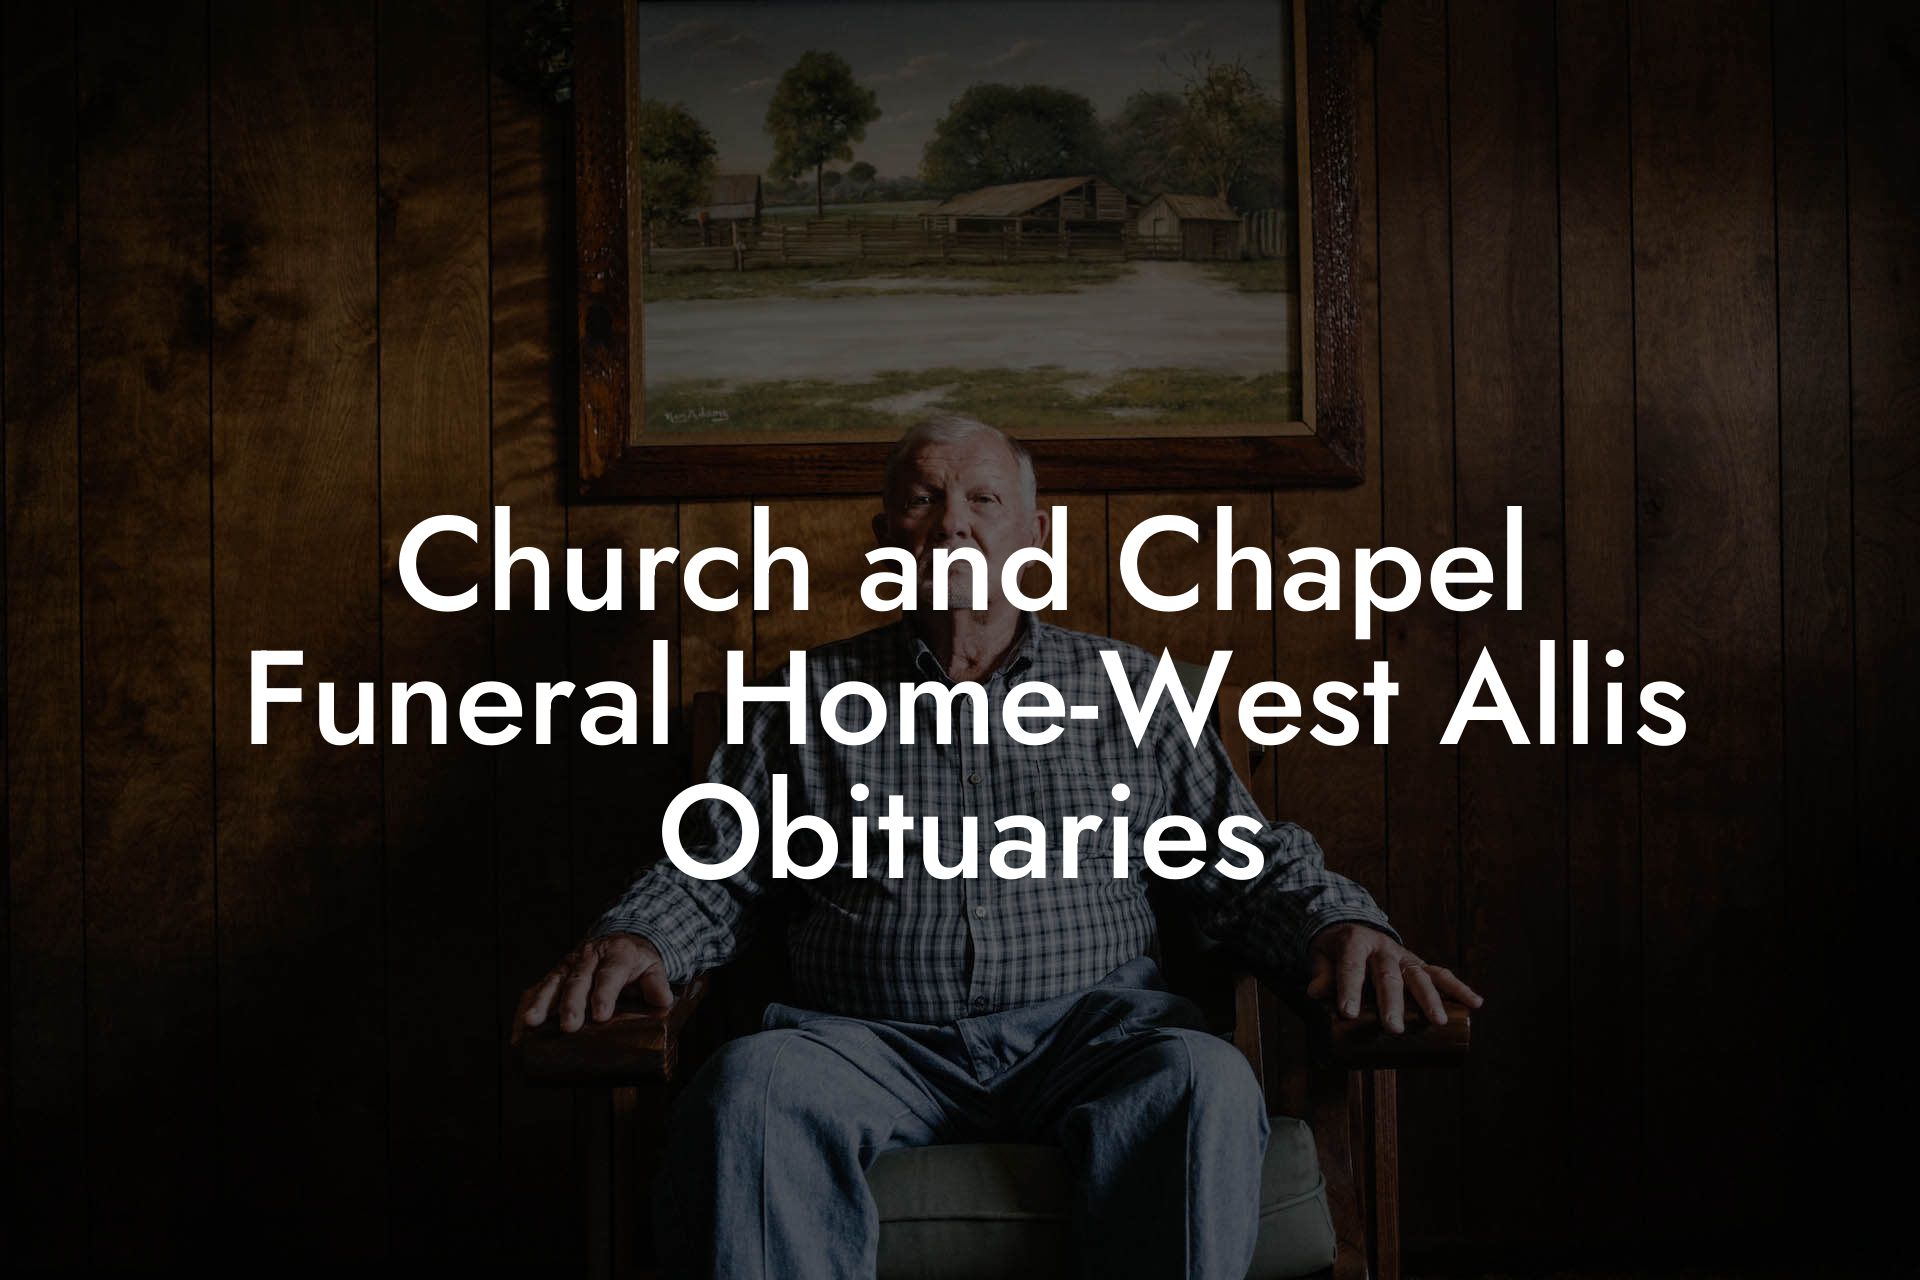 Church and Chapel Funeral Home-West Allis Obituaries